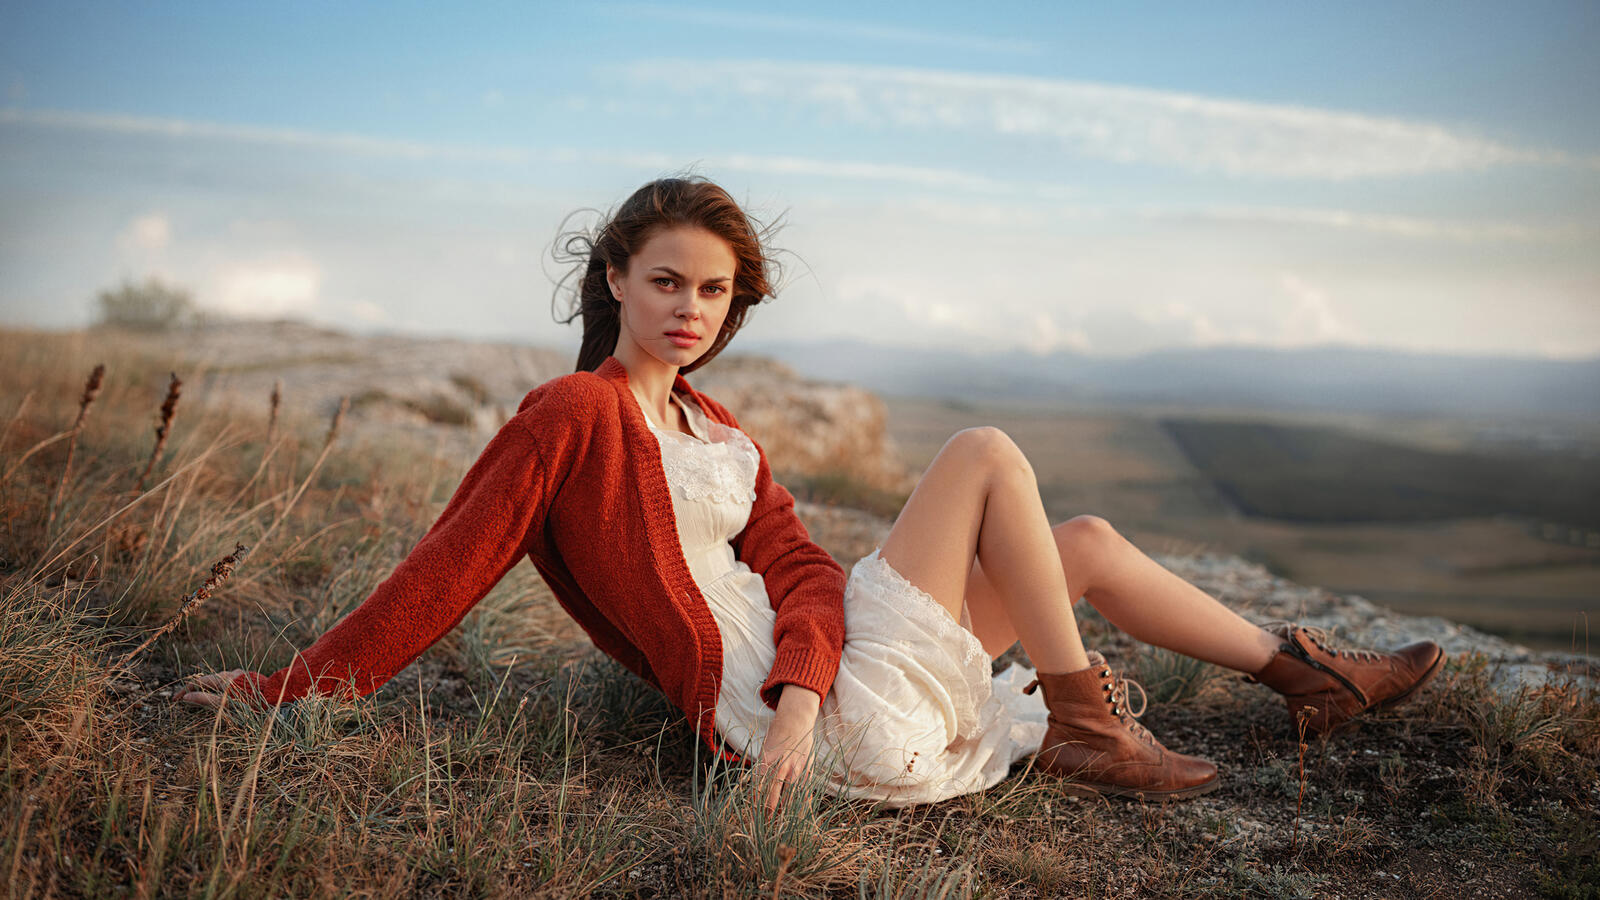 Free photo A girl in a red sweater resting in nature